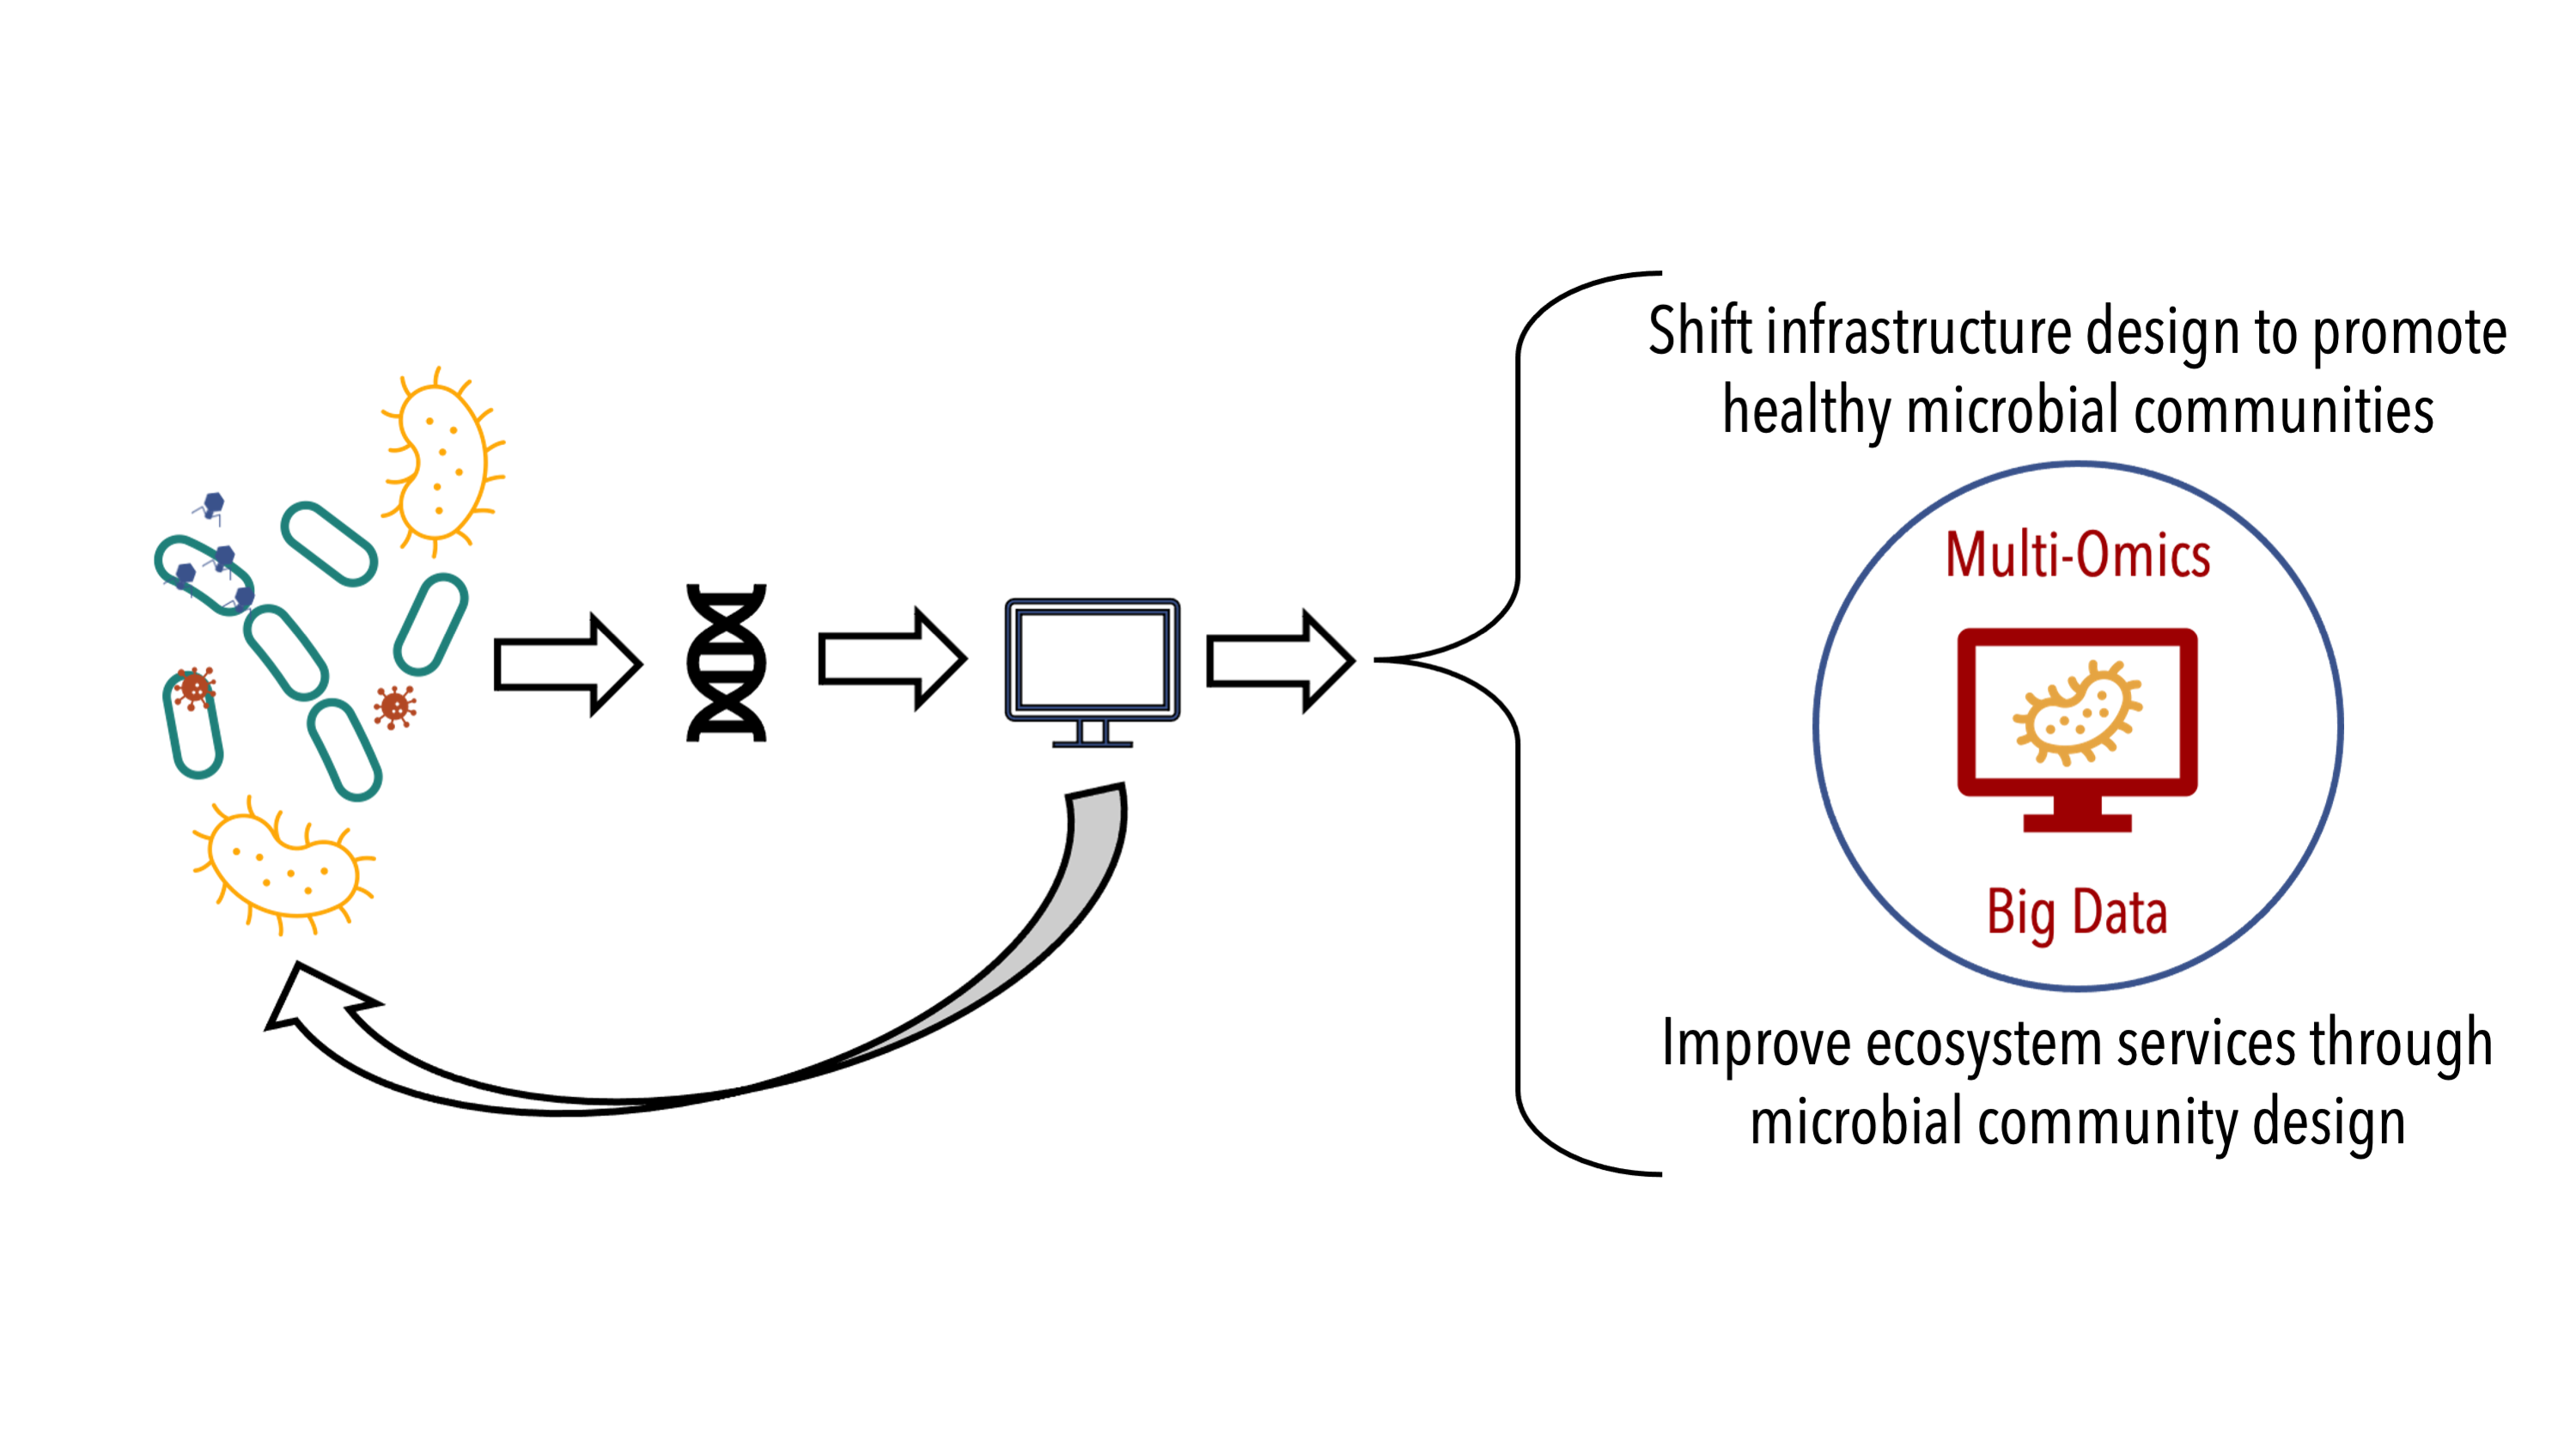 flow diagram illustrating the cyclical role of omic and big data approaches to (1) shift infrastructure design to promote healthy microbial communities and (2) improve ecosystem services through microbial community design.